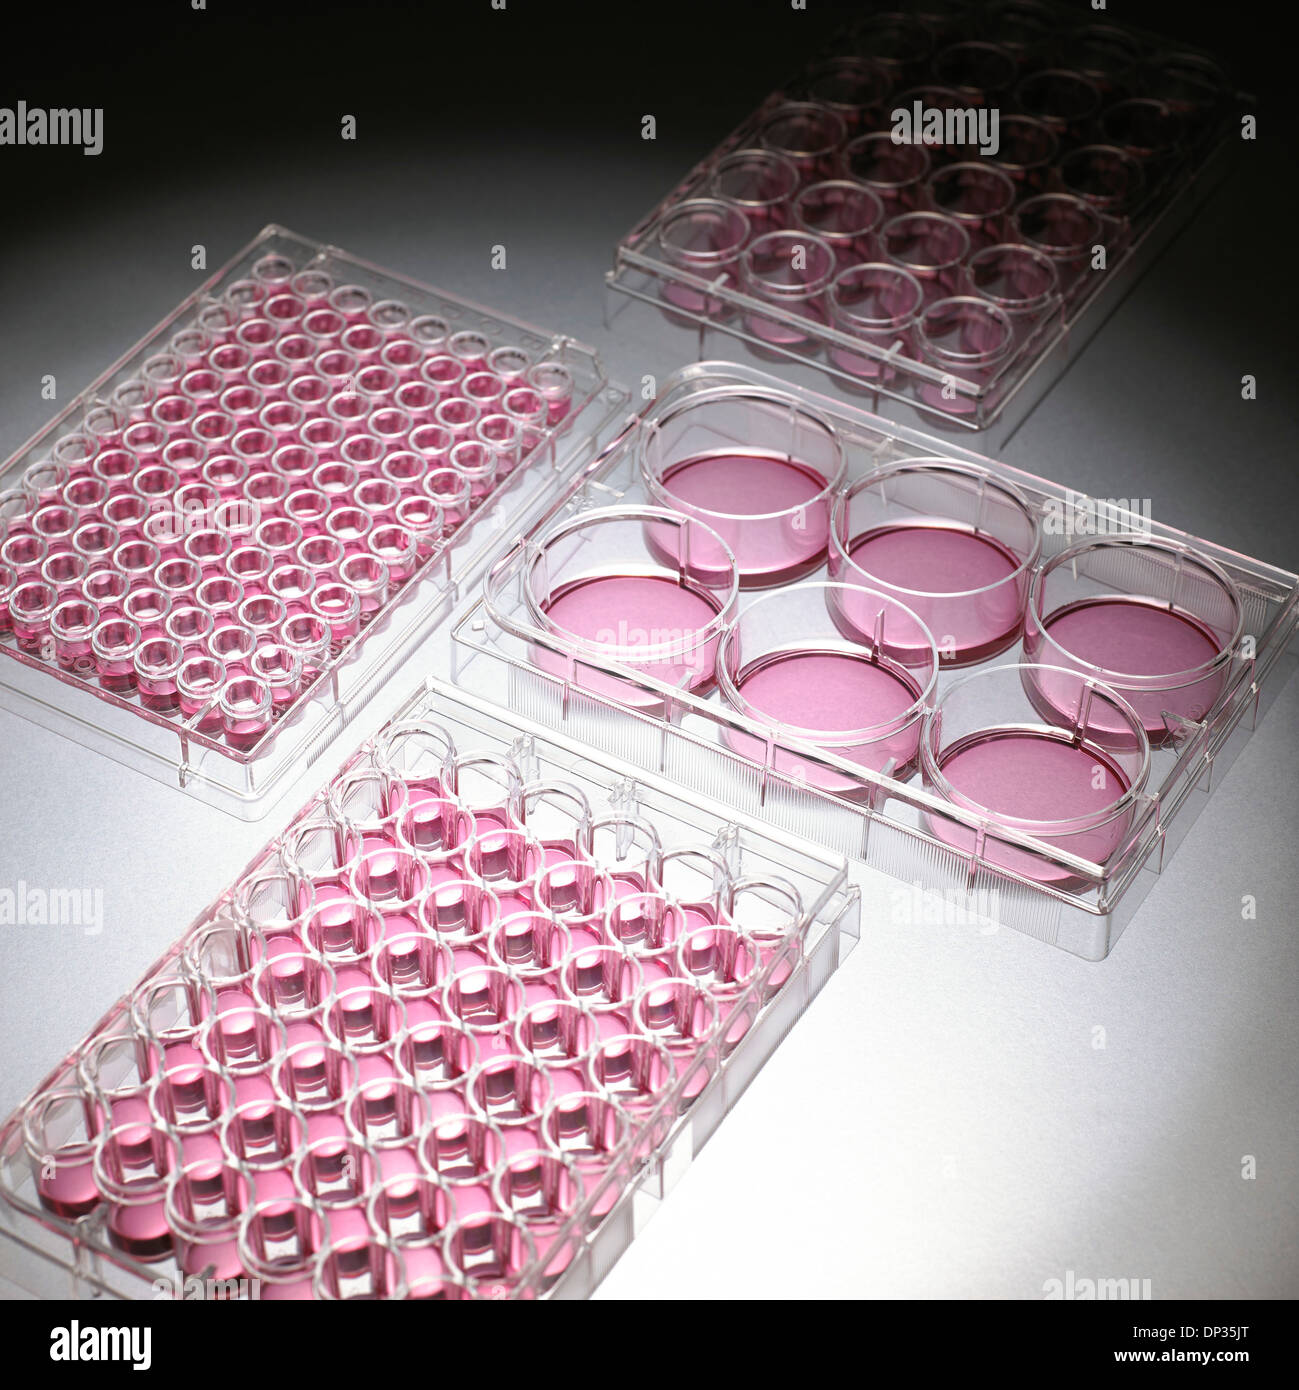 Cell culture plates Stock Photo